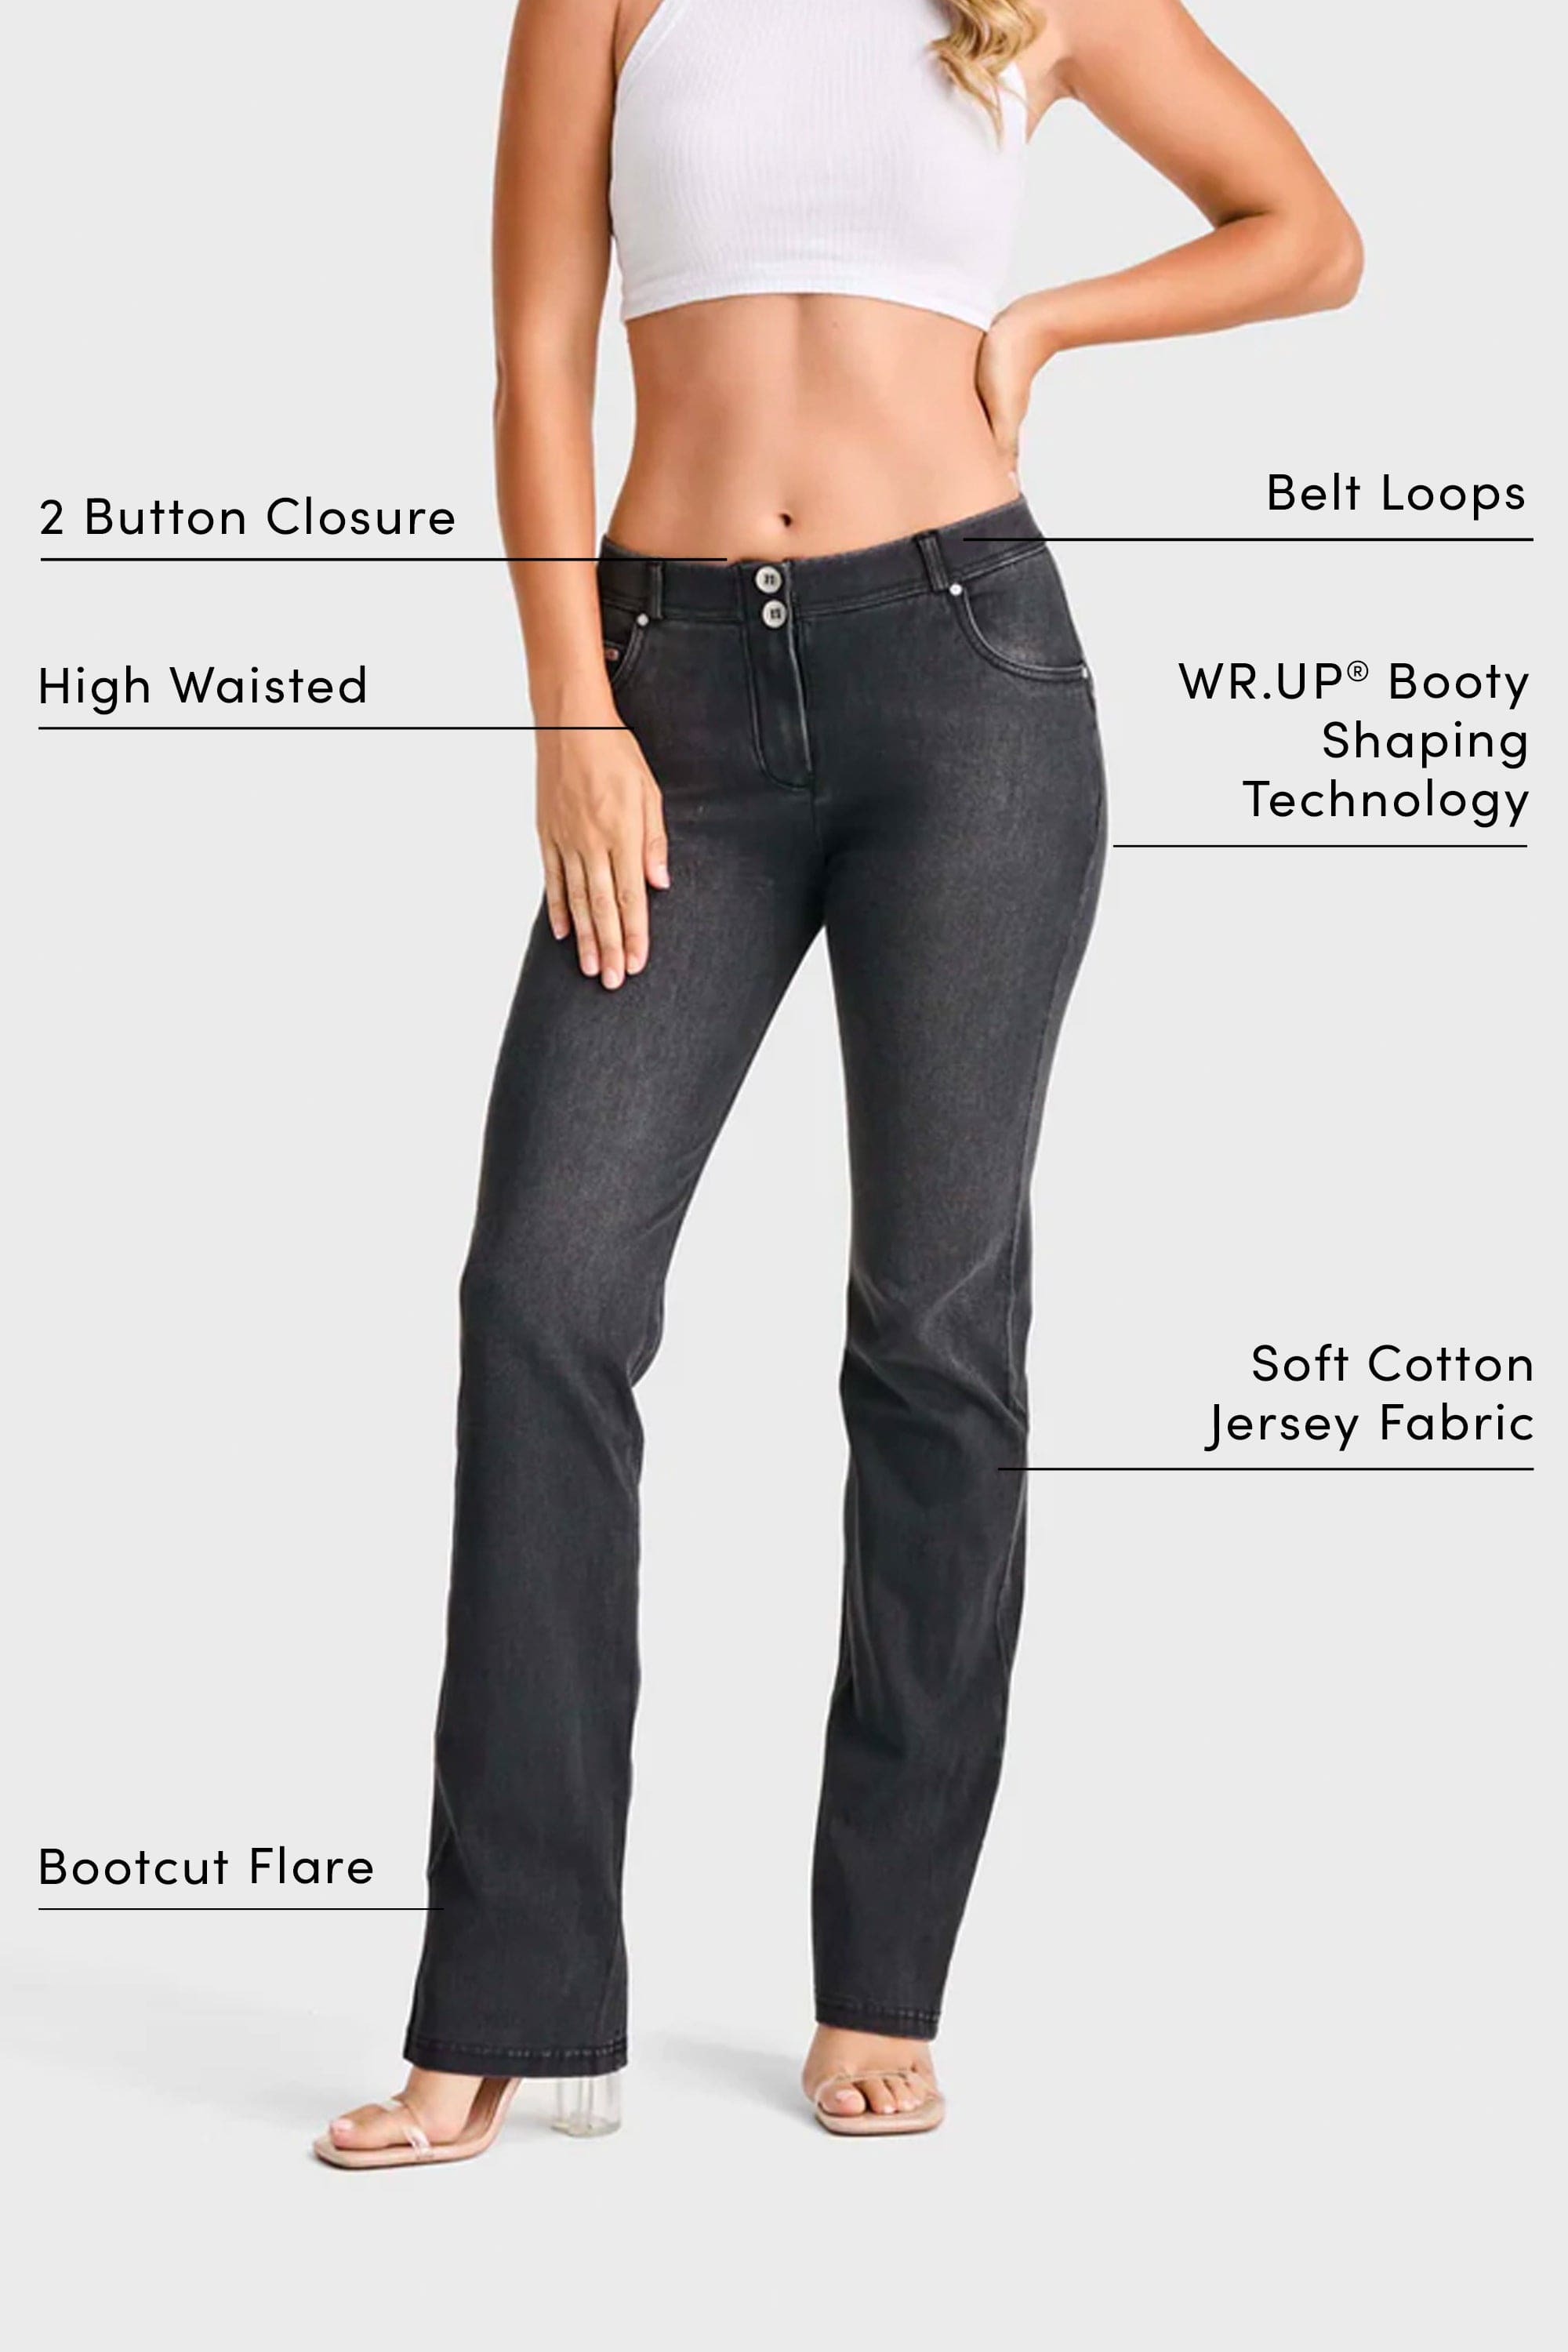 WR.UP® SNUG Jeans - 2 Button High Waisted - Bootcut - Black + Black Stitching 2